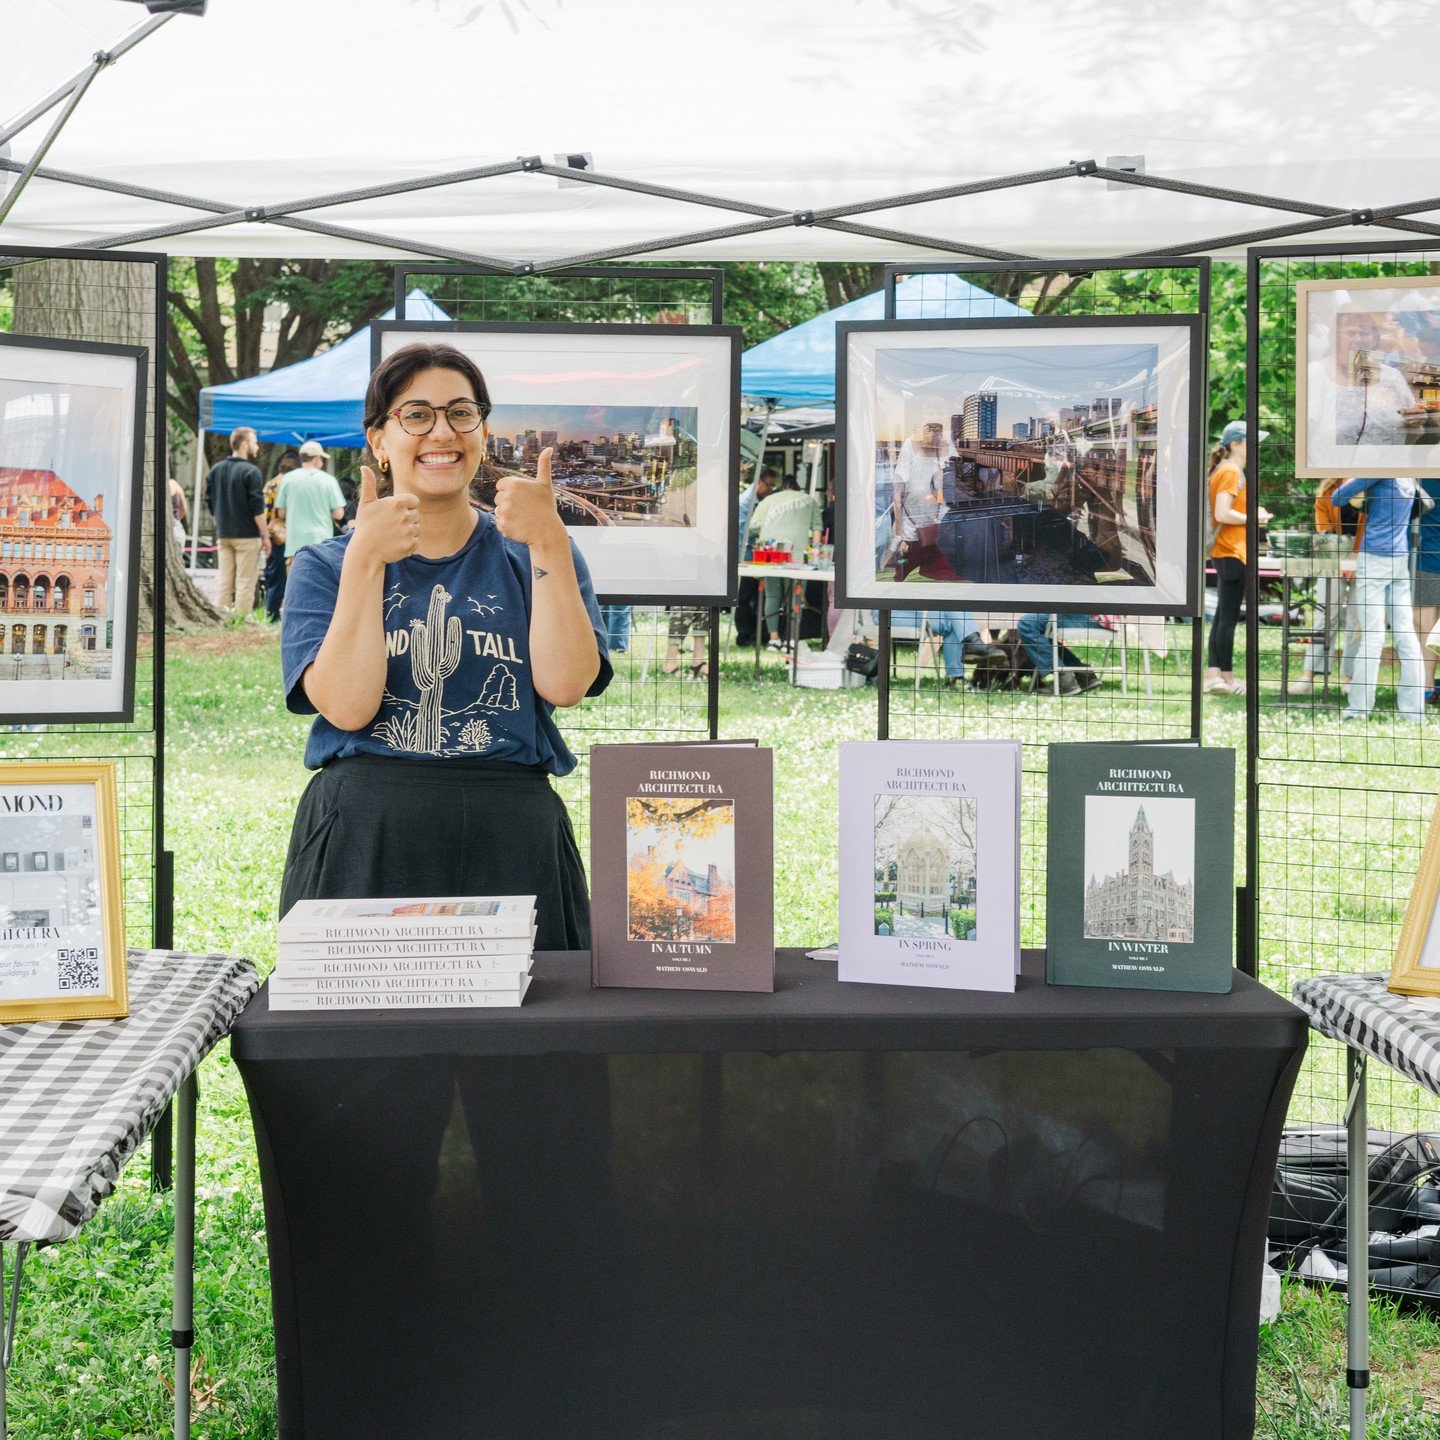 What an amazing event. Spring Fest with @chaofrva was a huge success. We actually sold all of our books and trying to figure out the logistics for that. Thank you so much for having us Church Hill!